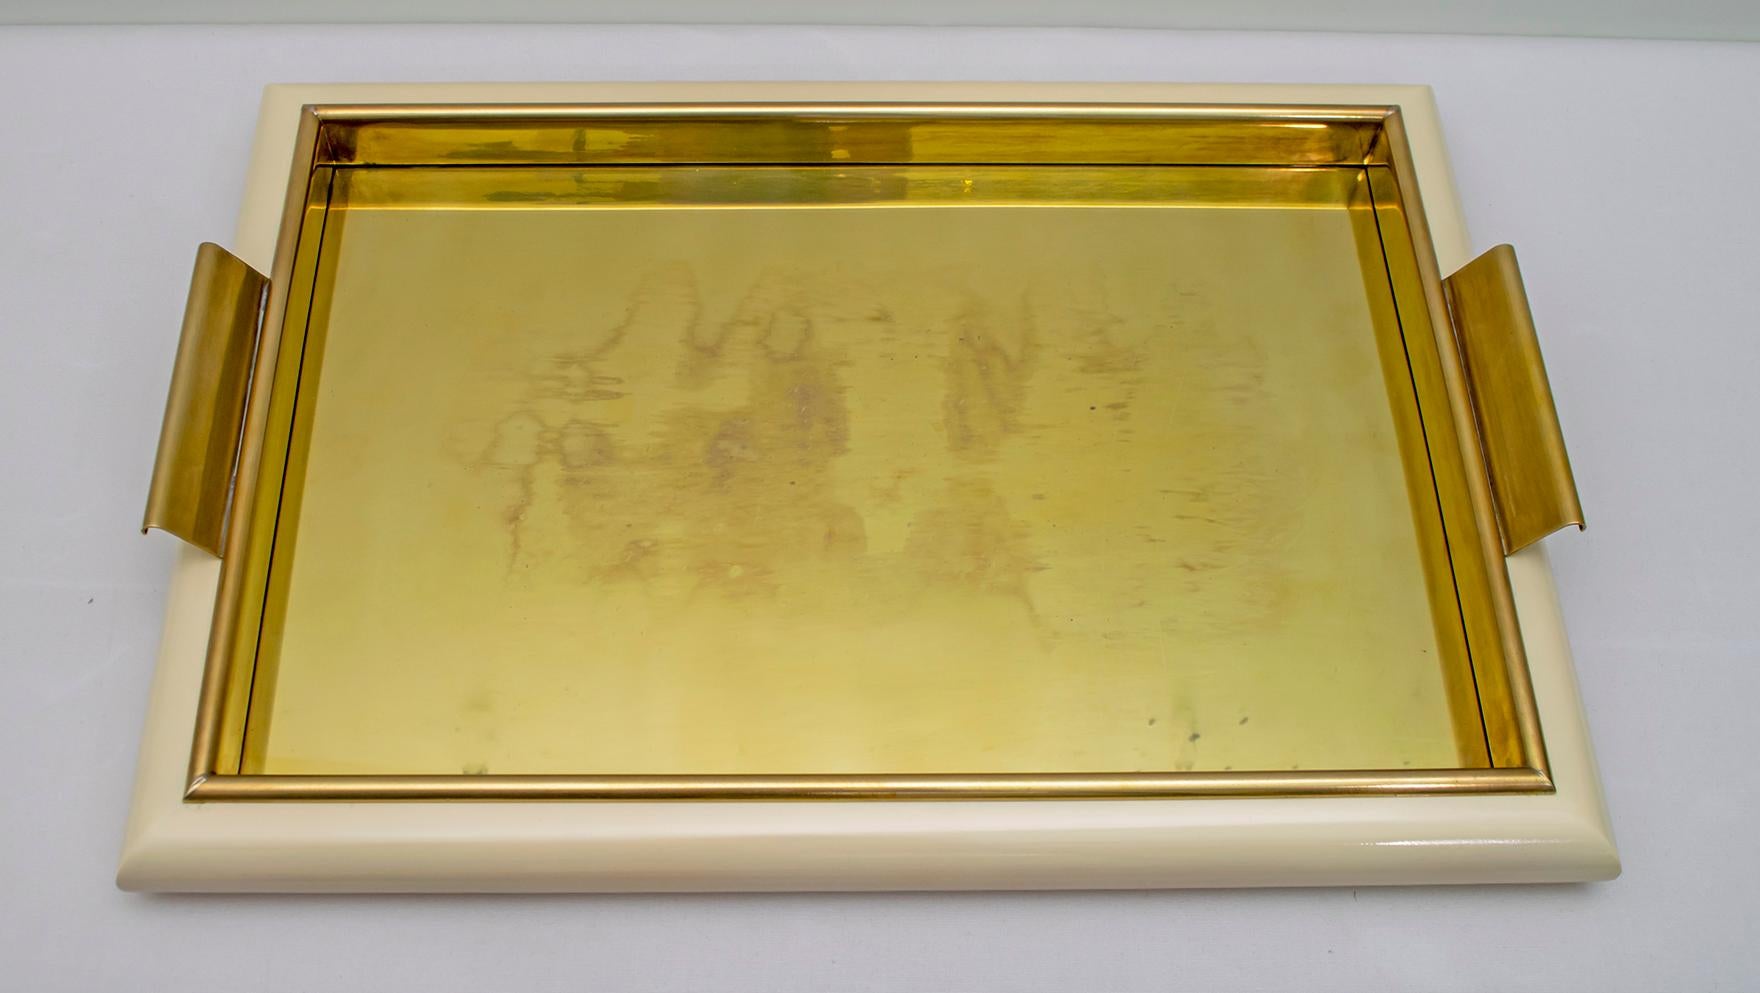 Tommaso Barbi serving tray produced in Italy in the 1970s
Structure in lacquered wood with an internal frame in edged brass, the support surface is composed of a brass plate protected by a plexiglass panel.